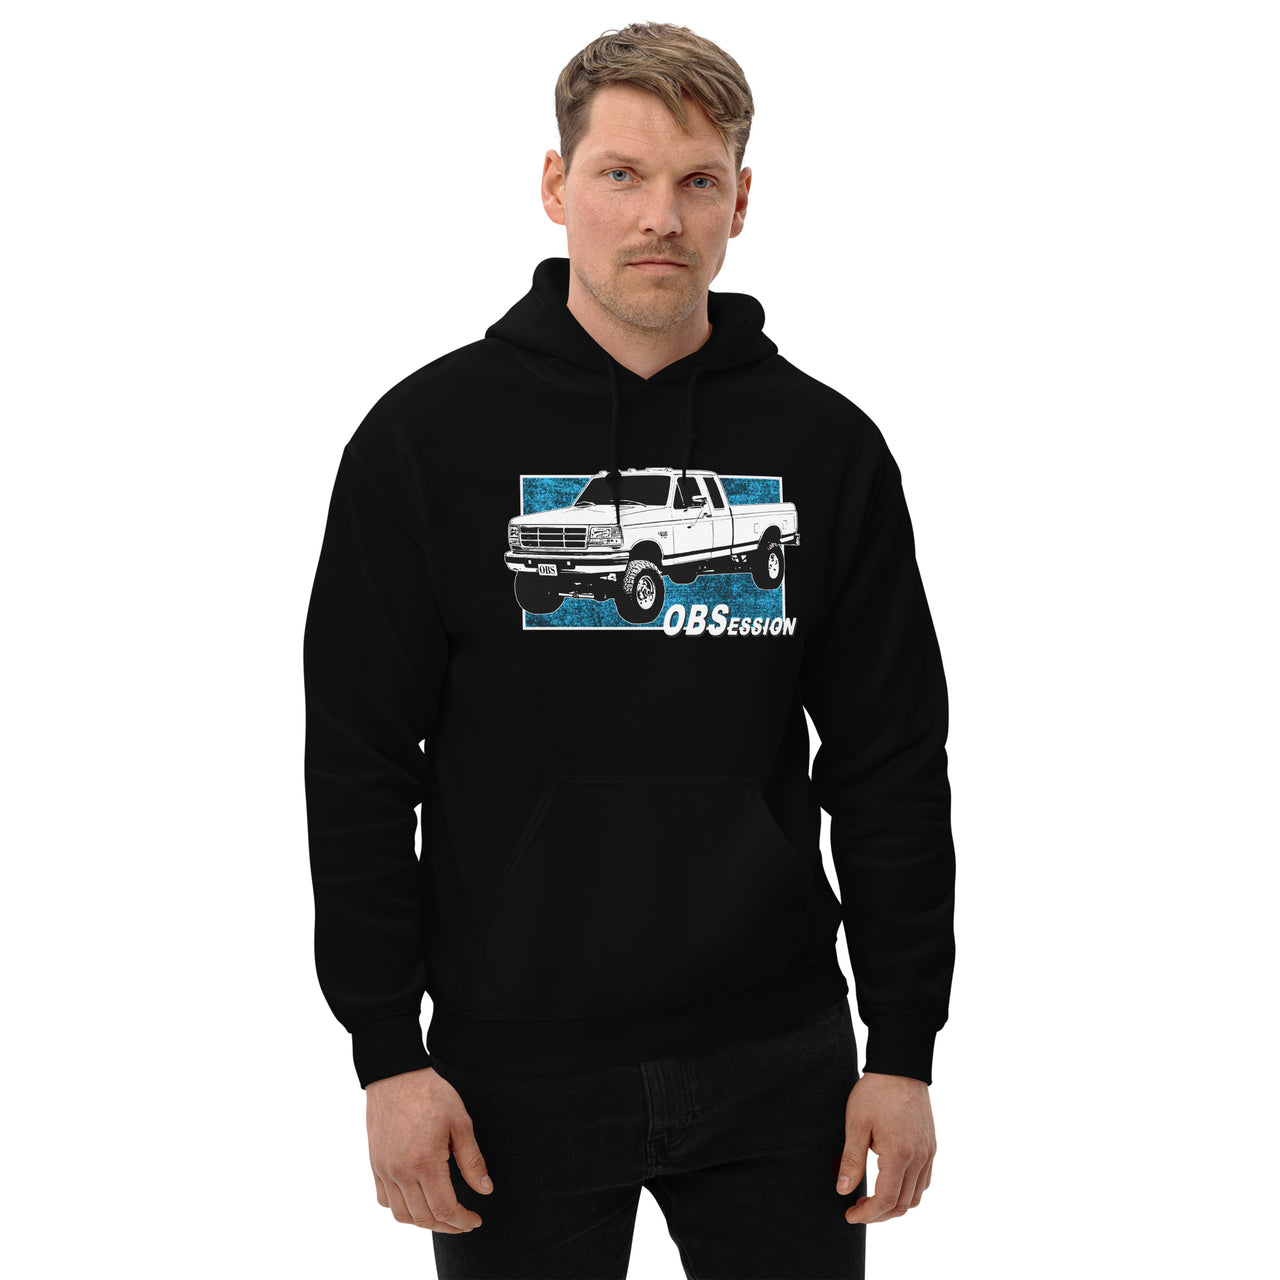 OBS Ext Cab Ford 4X4 Truck Hoodie modeled in black